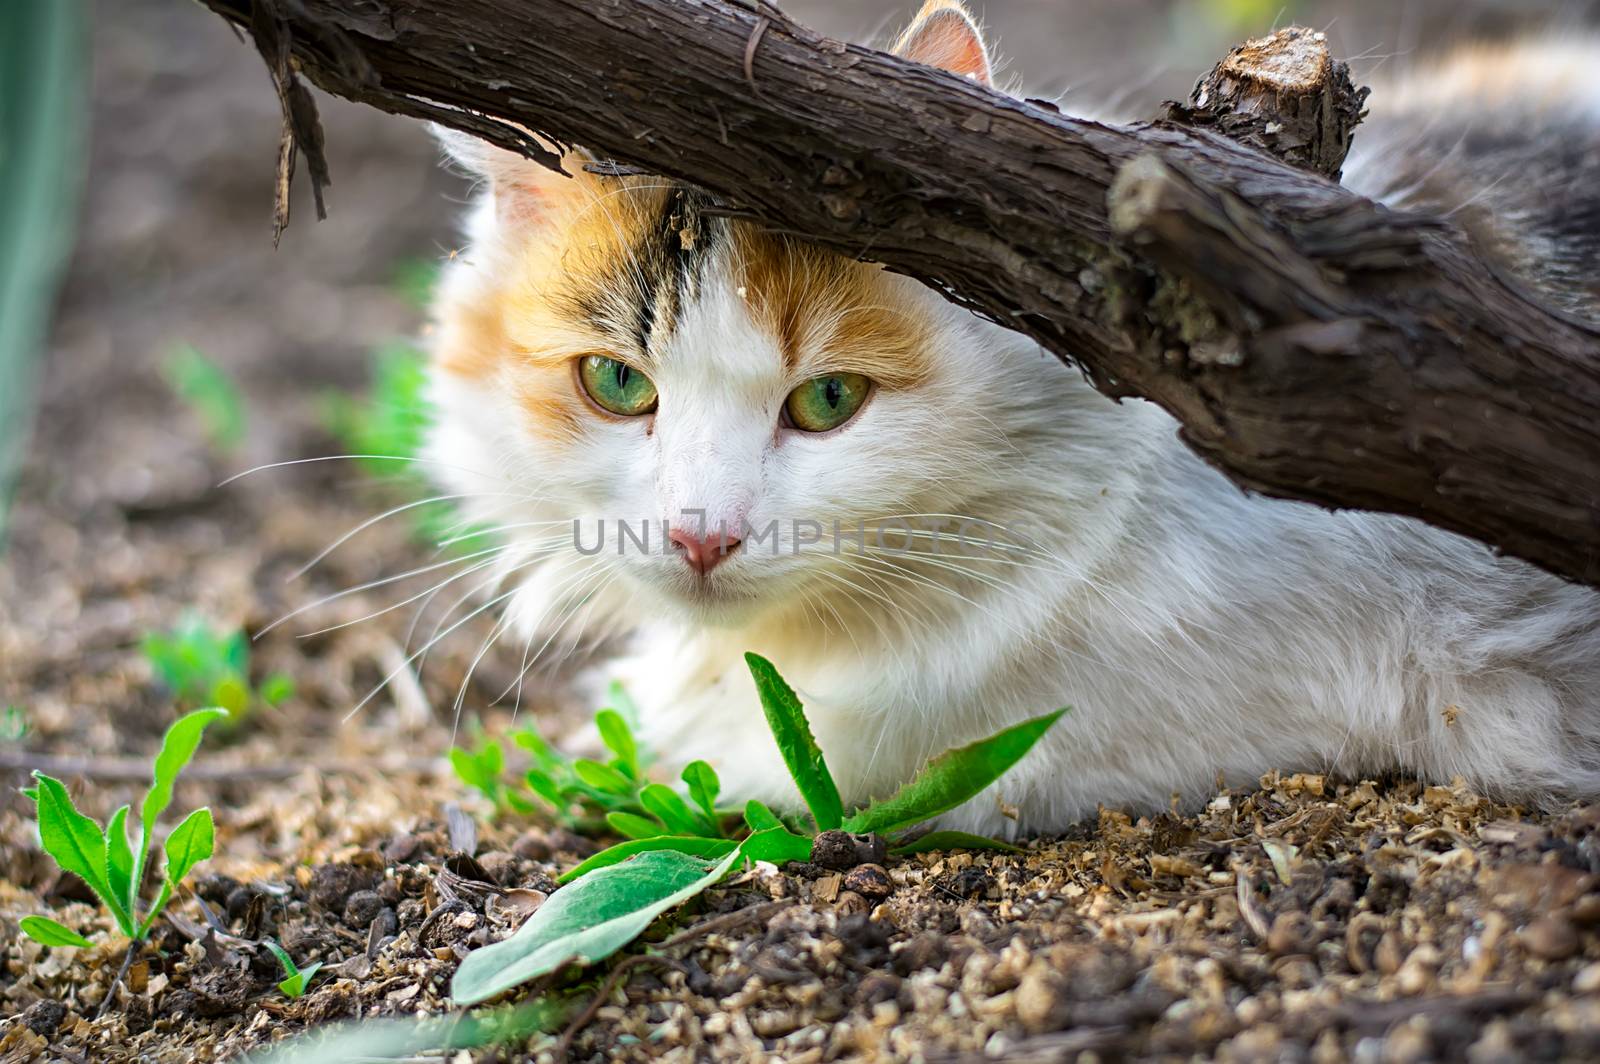 fluffy cat lying on the ground,hiding behind barrel of grapes.Selective focus